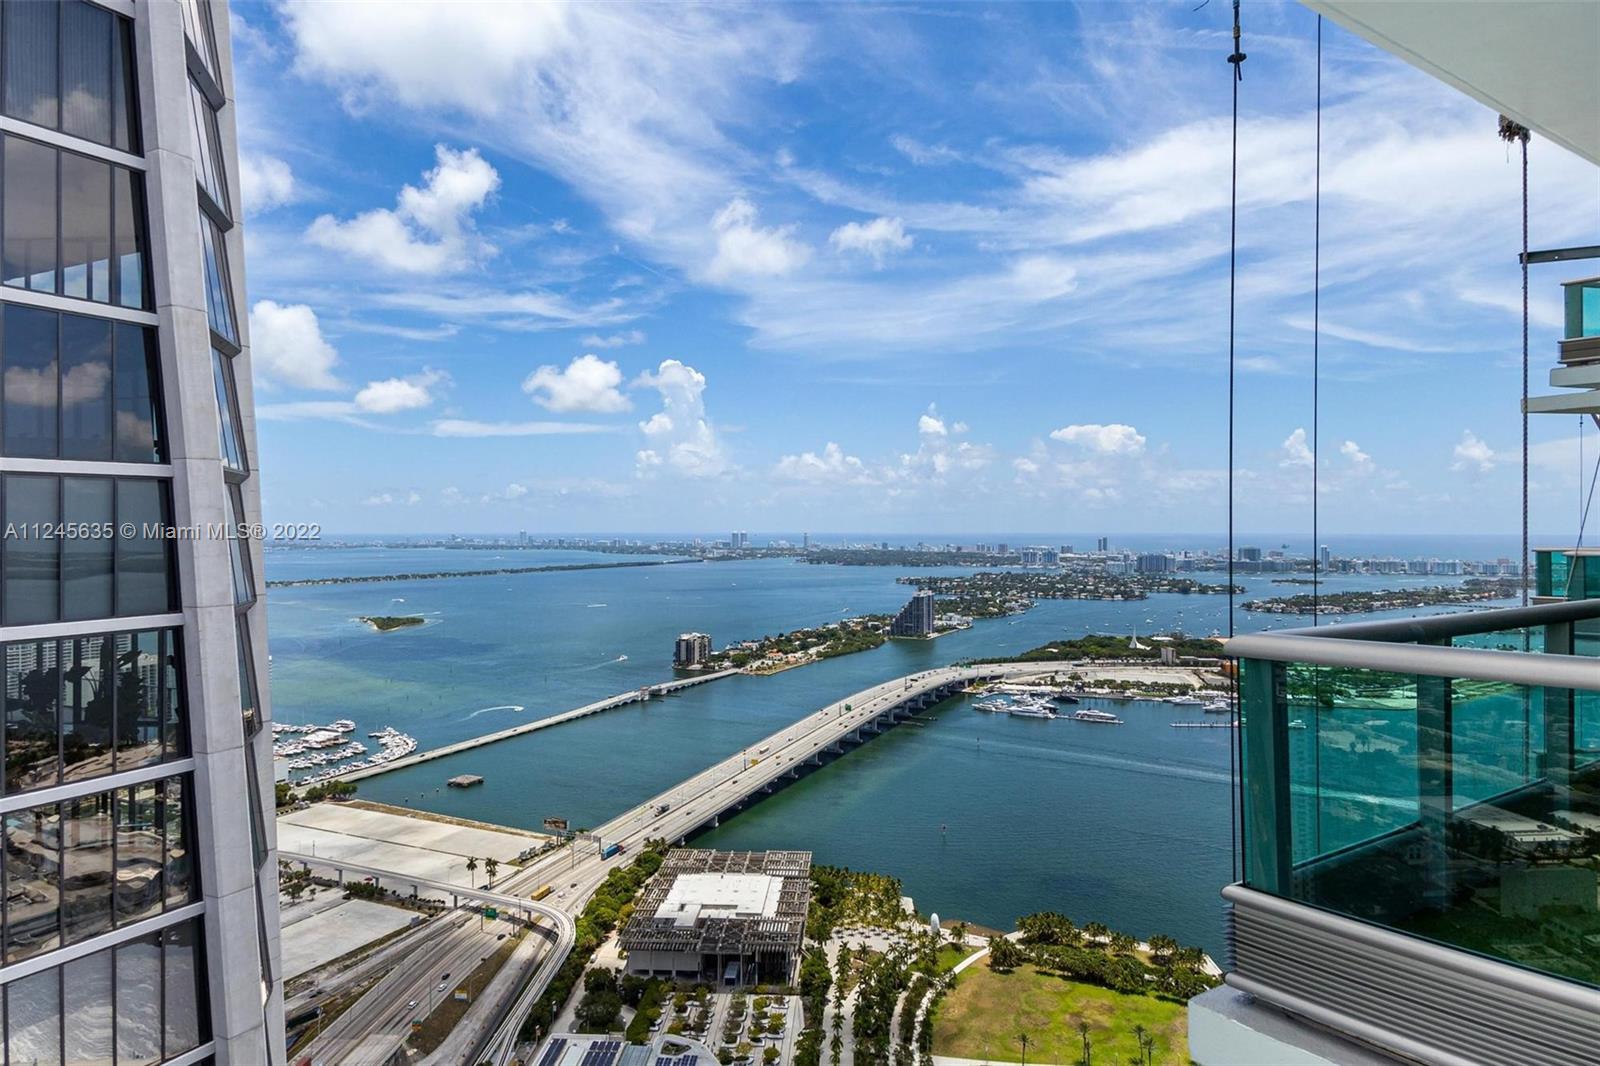 Live life at the top 63 Floors up! Rarely available top floor penthouse. Views from every bedroom; balconies in every room overlooking Biscayne Bay & the city skyline, perfect for sunsets/sunrises. 2,800+ interior sq ft. in Marble tile.  Ultimate privacy: Private Elevator w/ double door entrance & Feng Shui water fall to greet you. Stylish modern furniture/art compliment the expansive floor plan. Open kitchen/living area for entertaining, top of the line appliances. Large master with tons of closet space. Too much to list, this is a must visit property. Amazing gym complex with spa, multiple swimming pools, business center, party room. Minutes from seaport, airport, cruise terminal, South Beach, Financial District, Arts/Cultural centers. Live downtown & be part of Miami's future today!